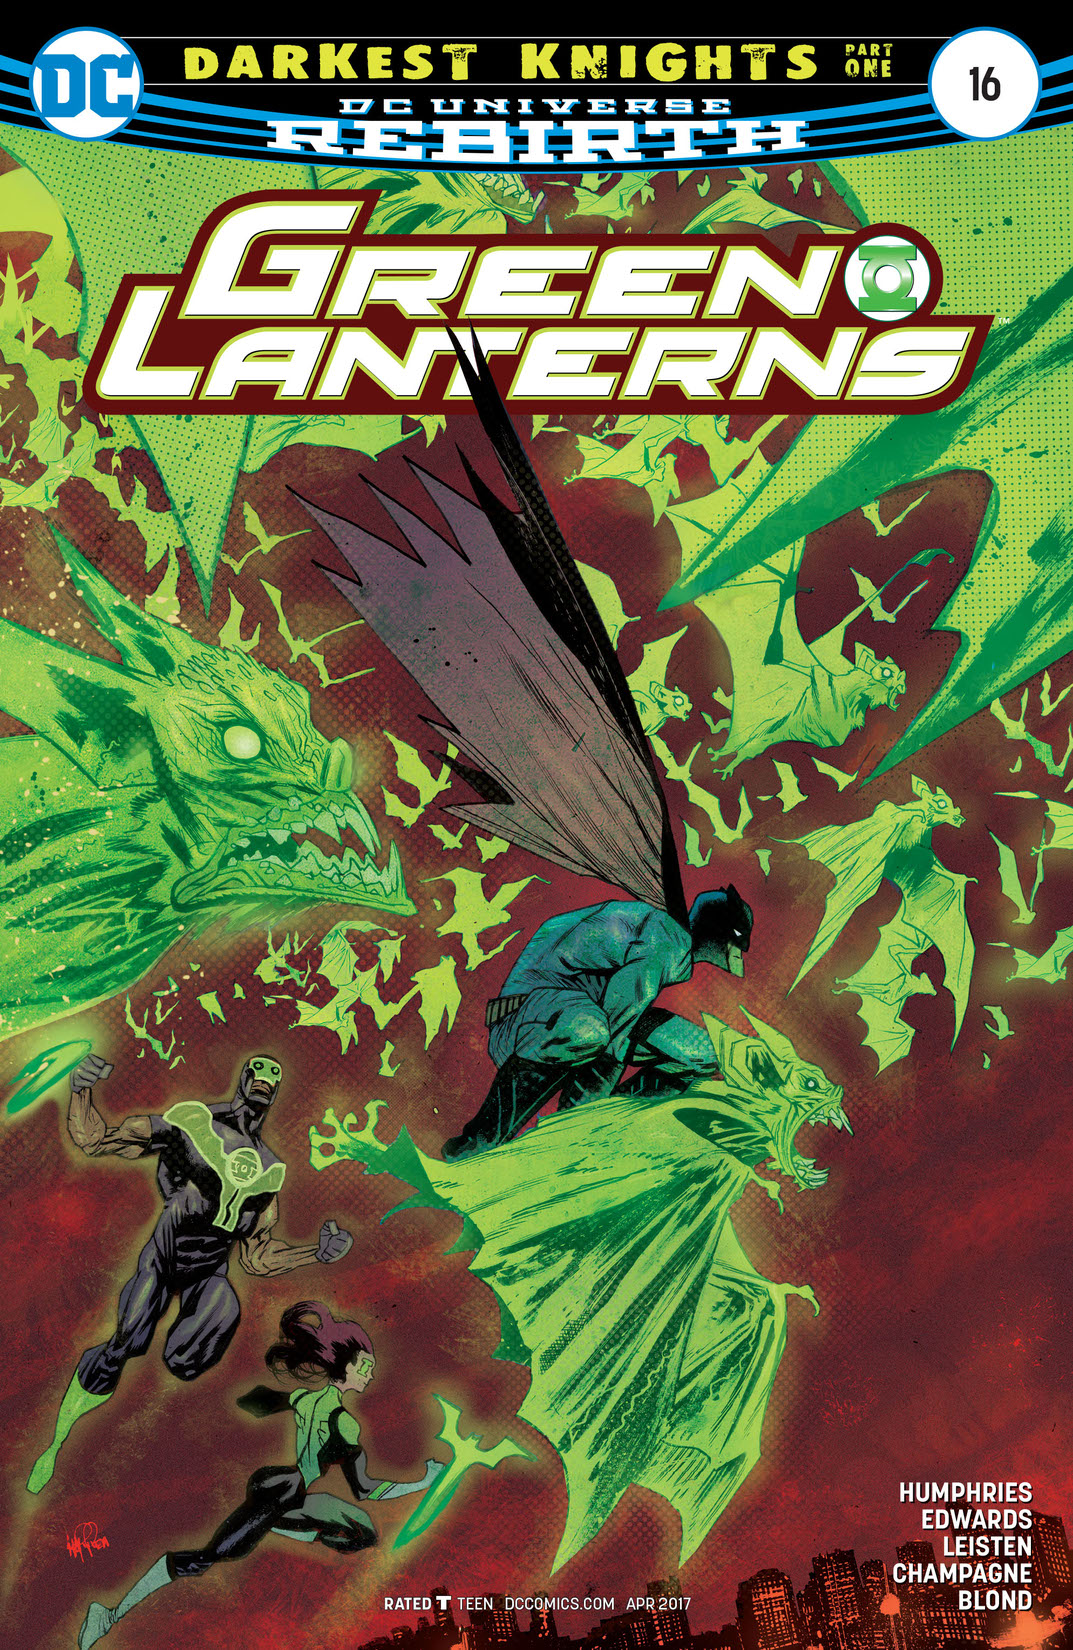 Green Lanterns #16 preview images